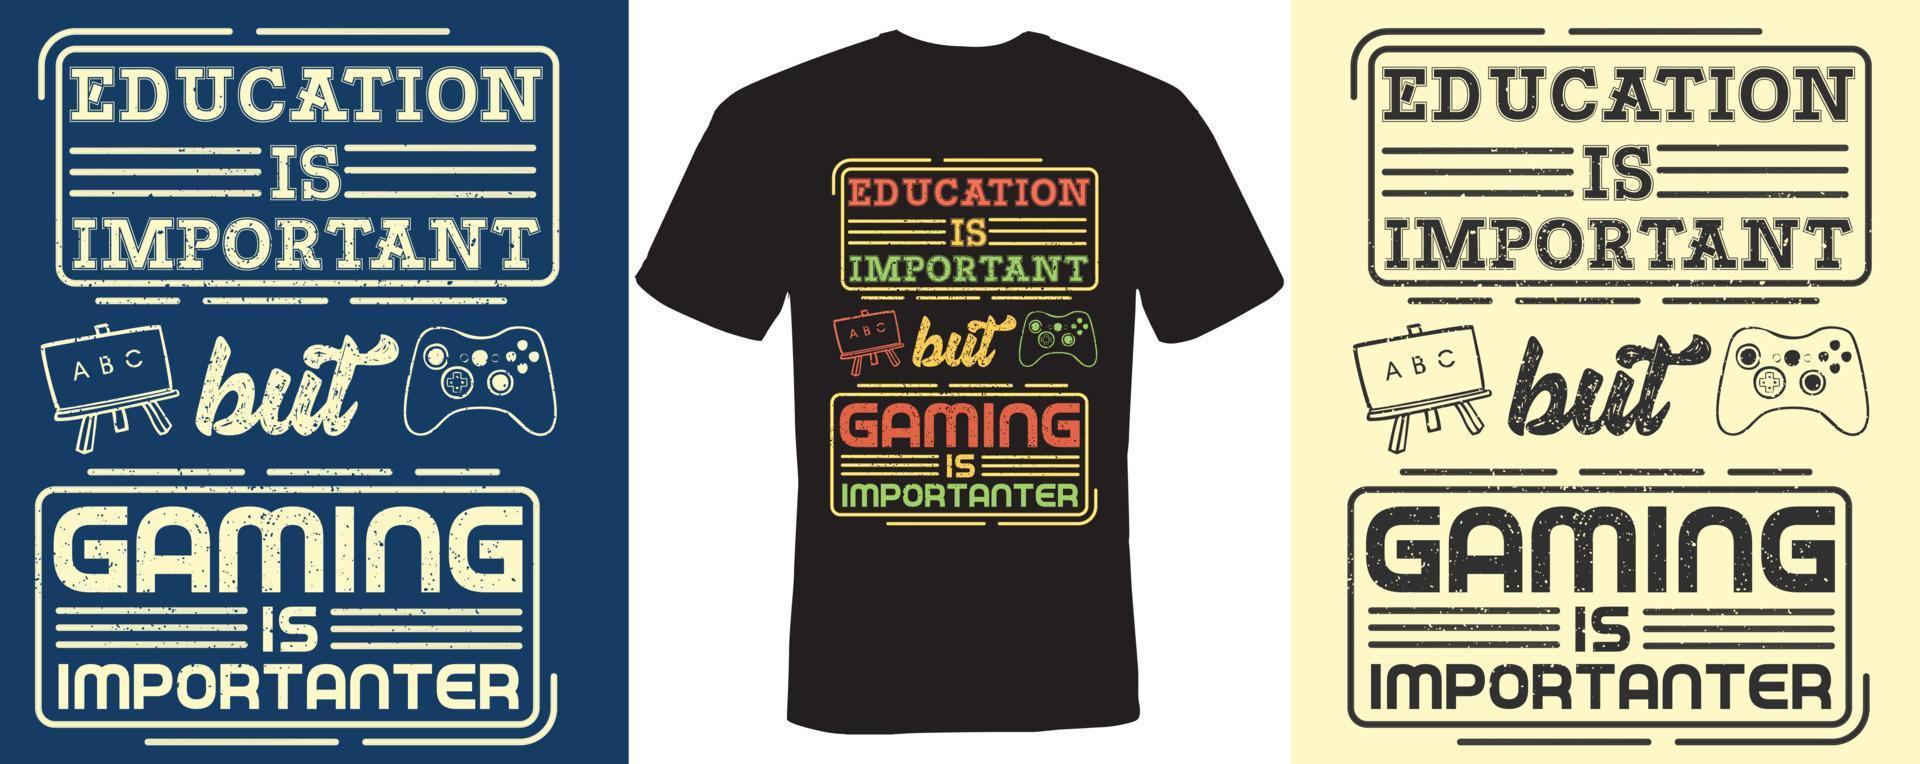 Education is important but gaming is importanter T-shirt design vector